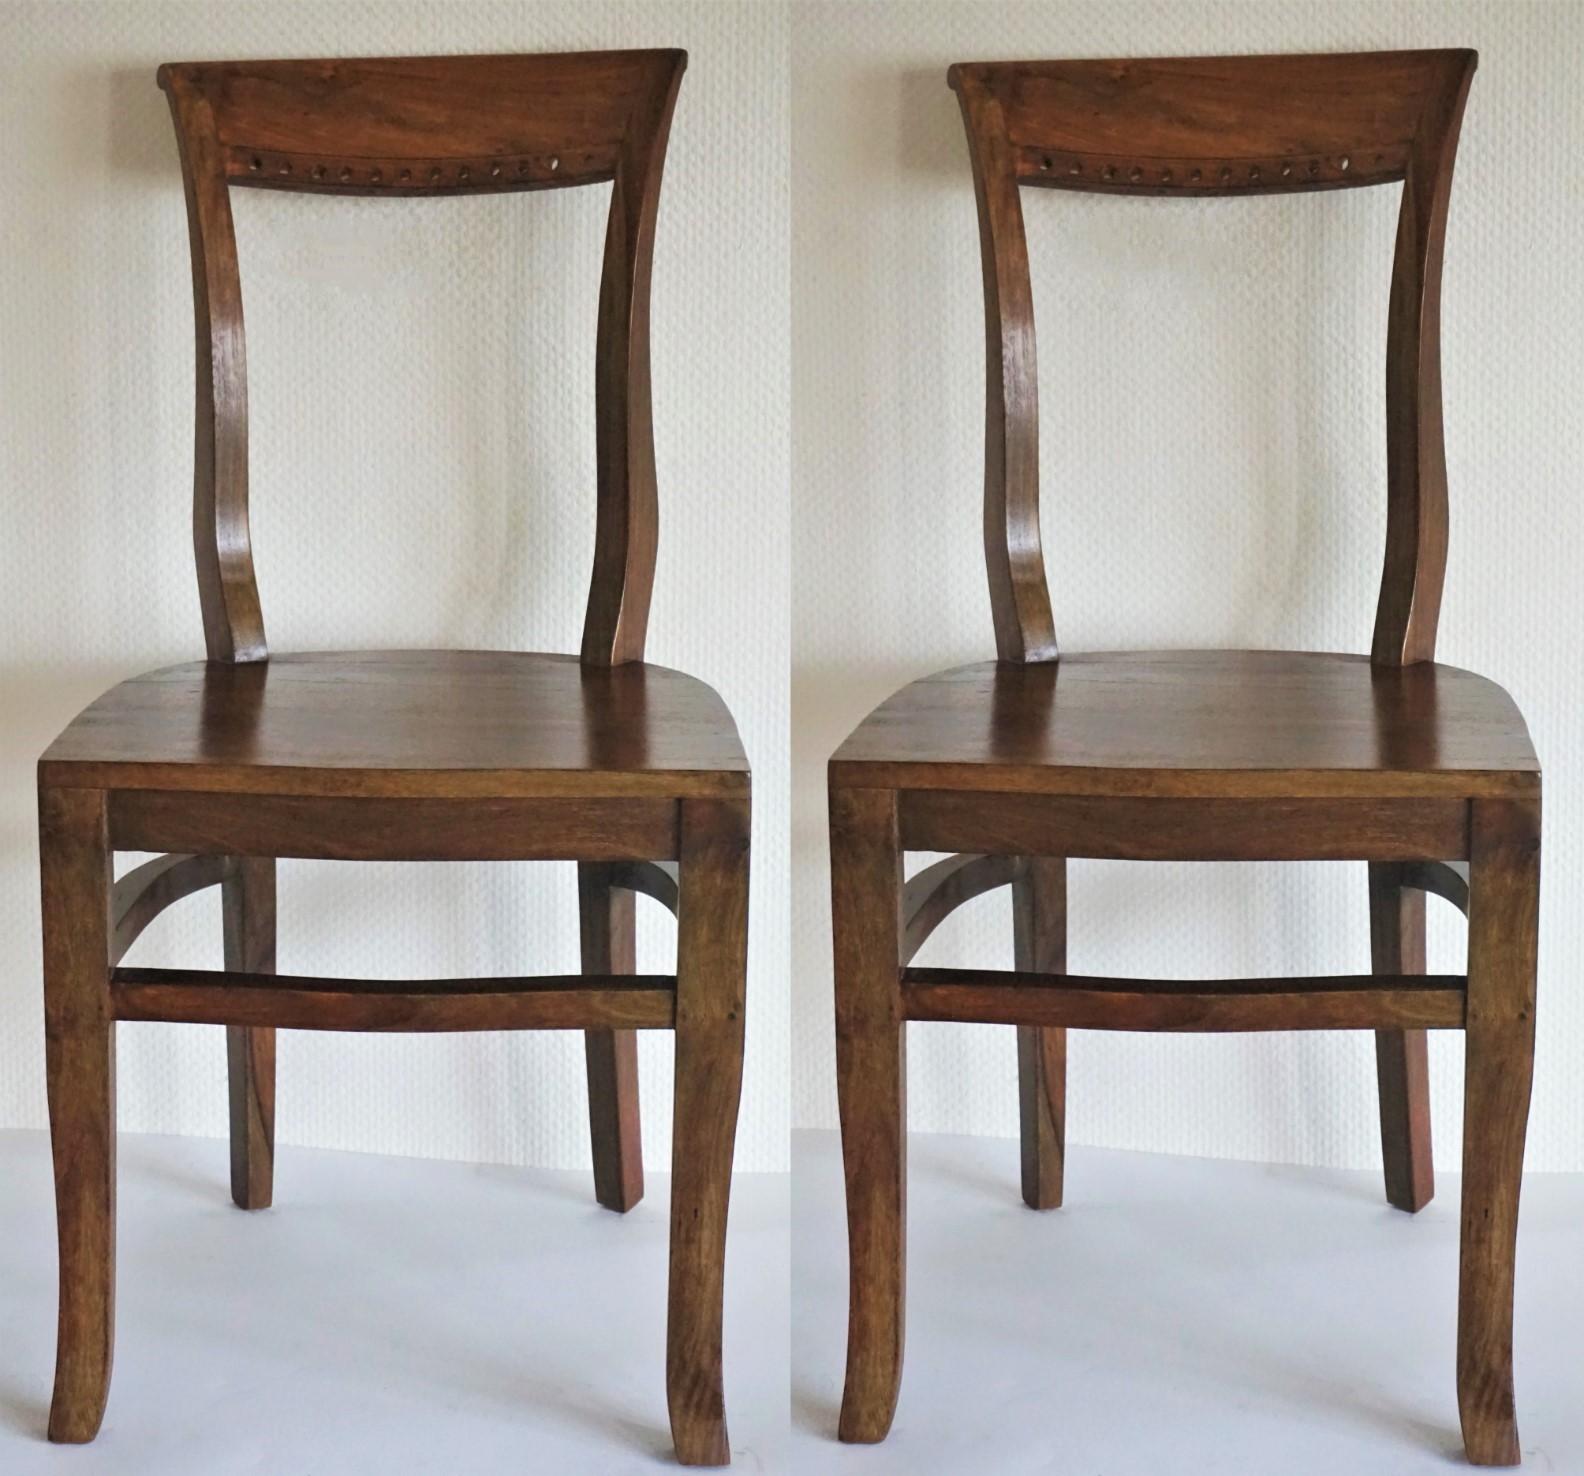 Four Art Deco solid Oak dining chairs in elegant design with curved back providing comfortable support, late 1930s 
Height 35 in (89 cm)
Width 17.75 in (45 cm) 
Depth 17.75 in (45 cm)
Seat height 18 (45.5 cm).
   